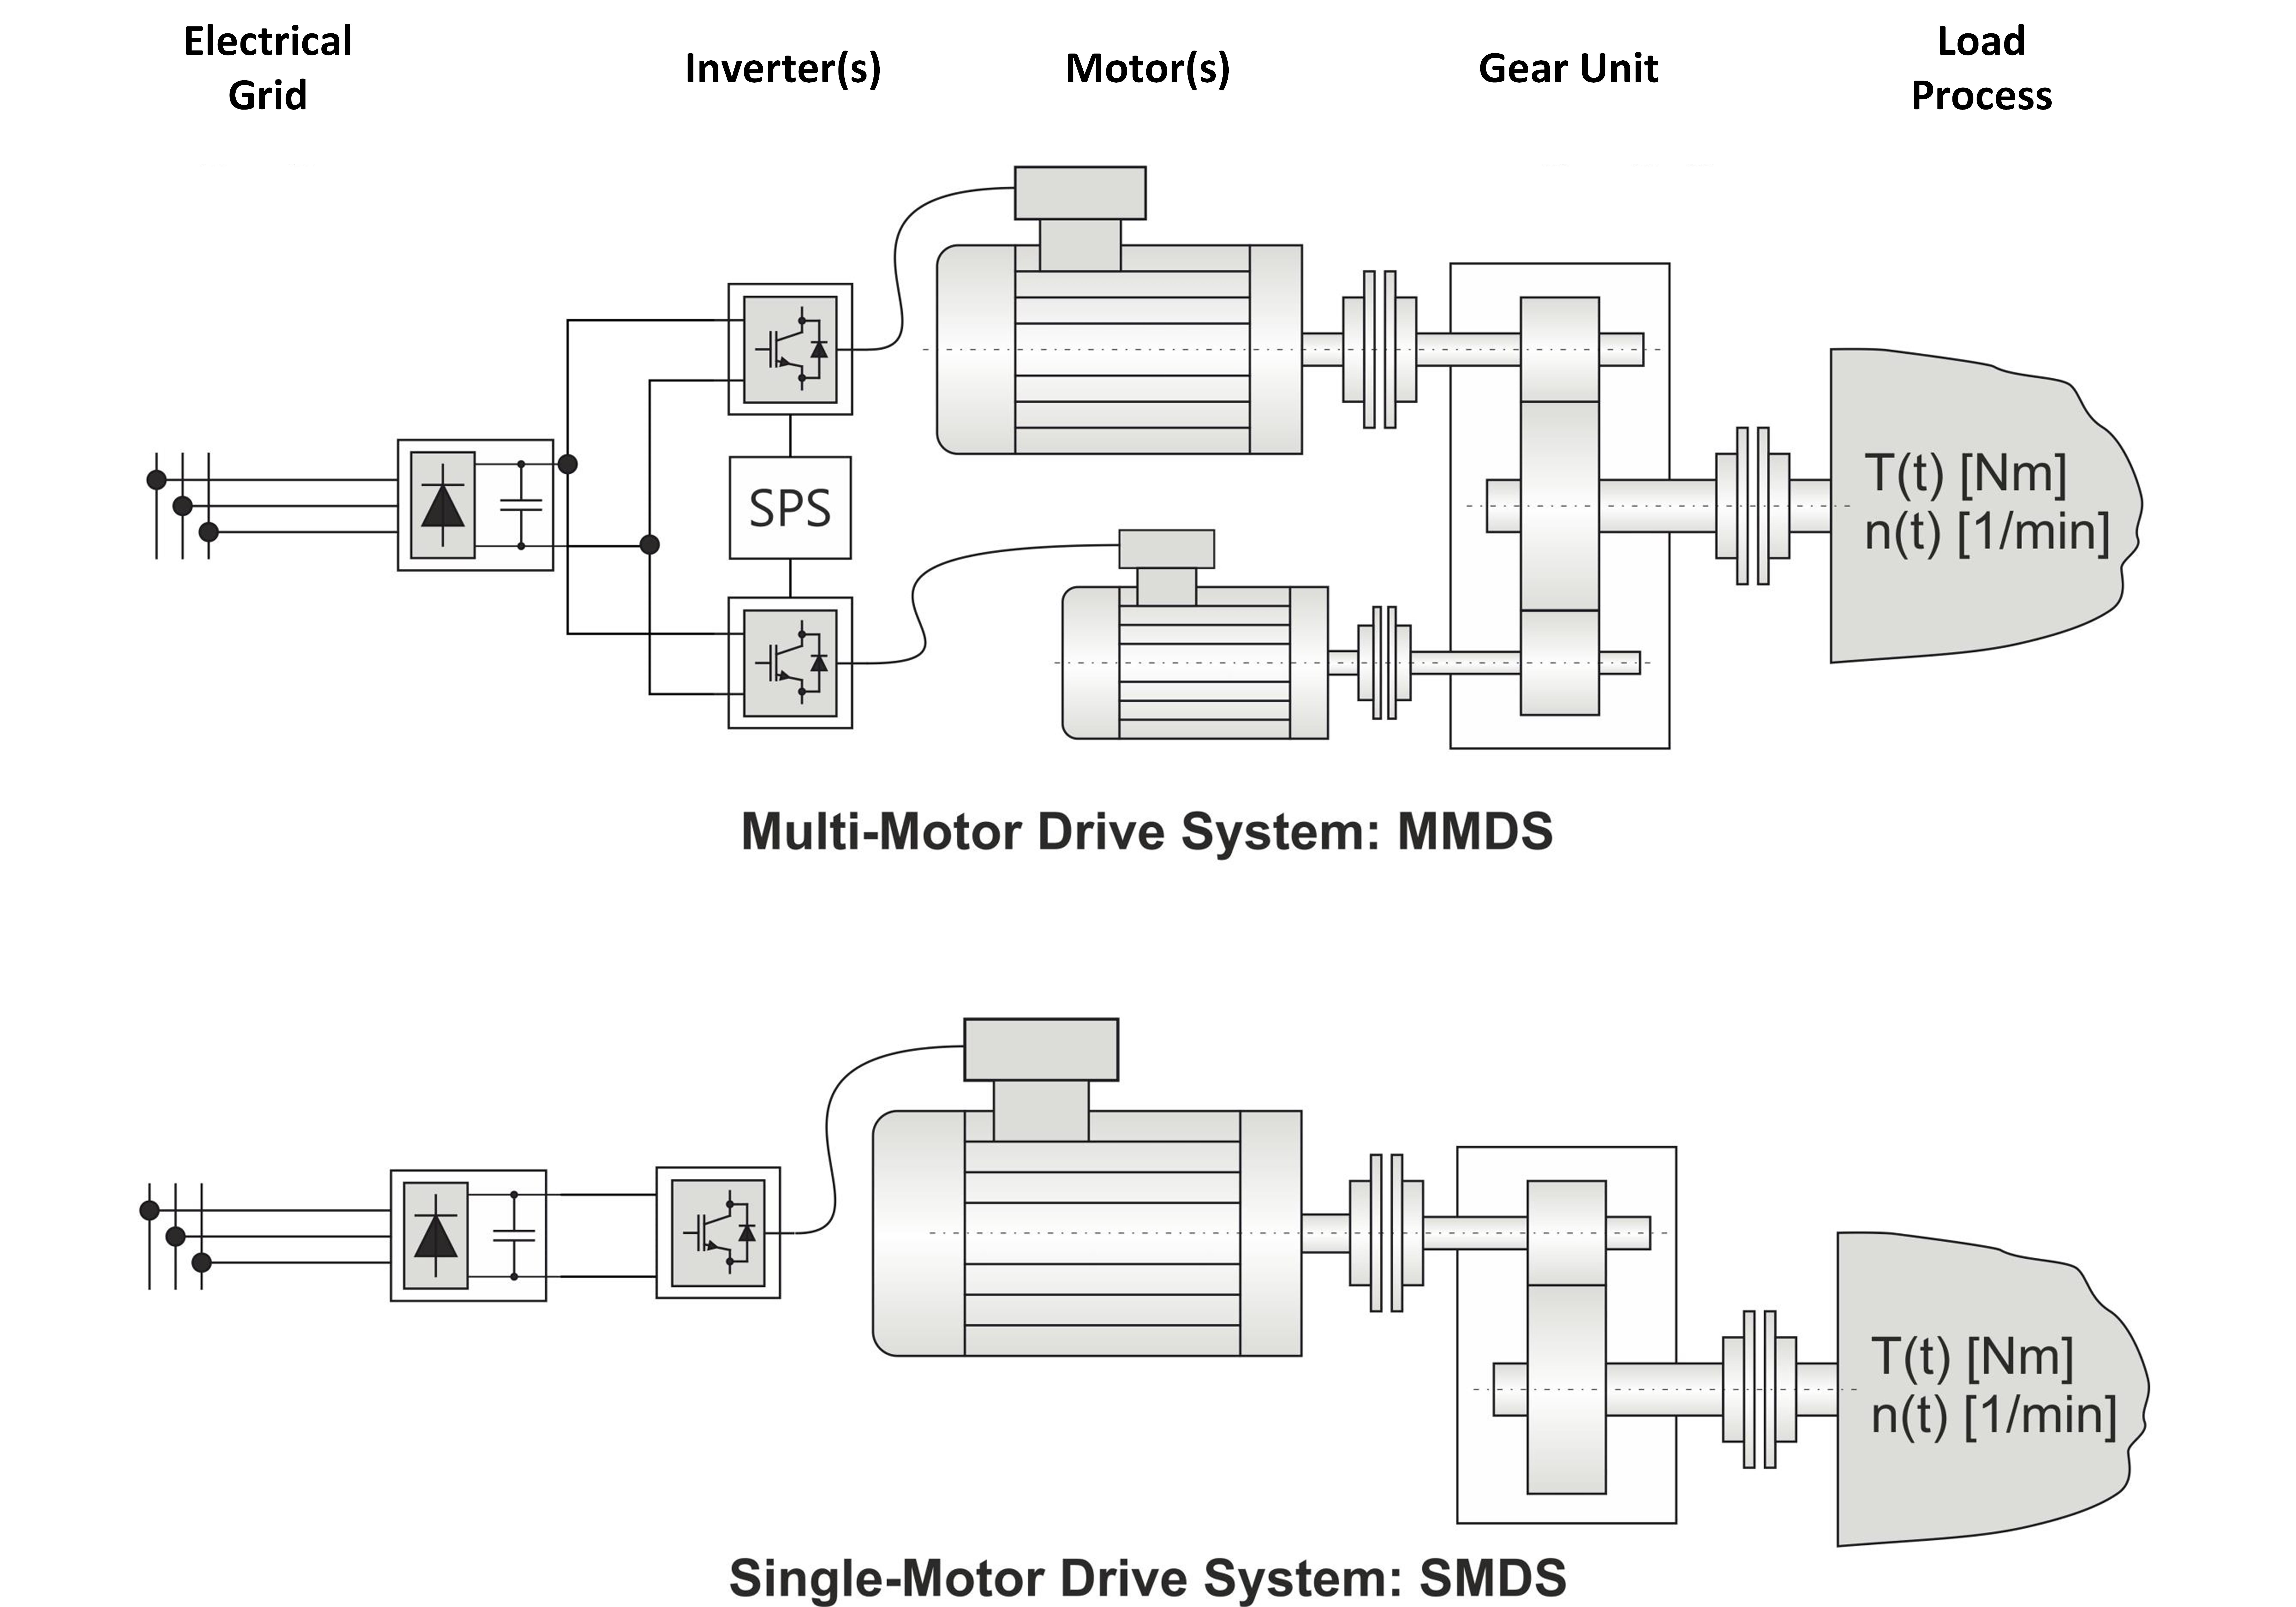 Structure of MMDS and SMDS